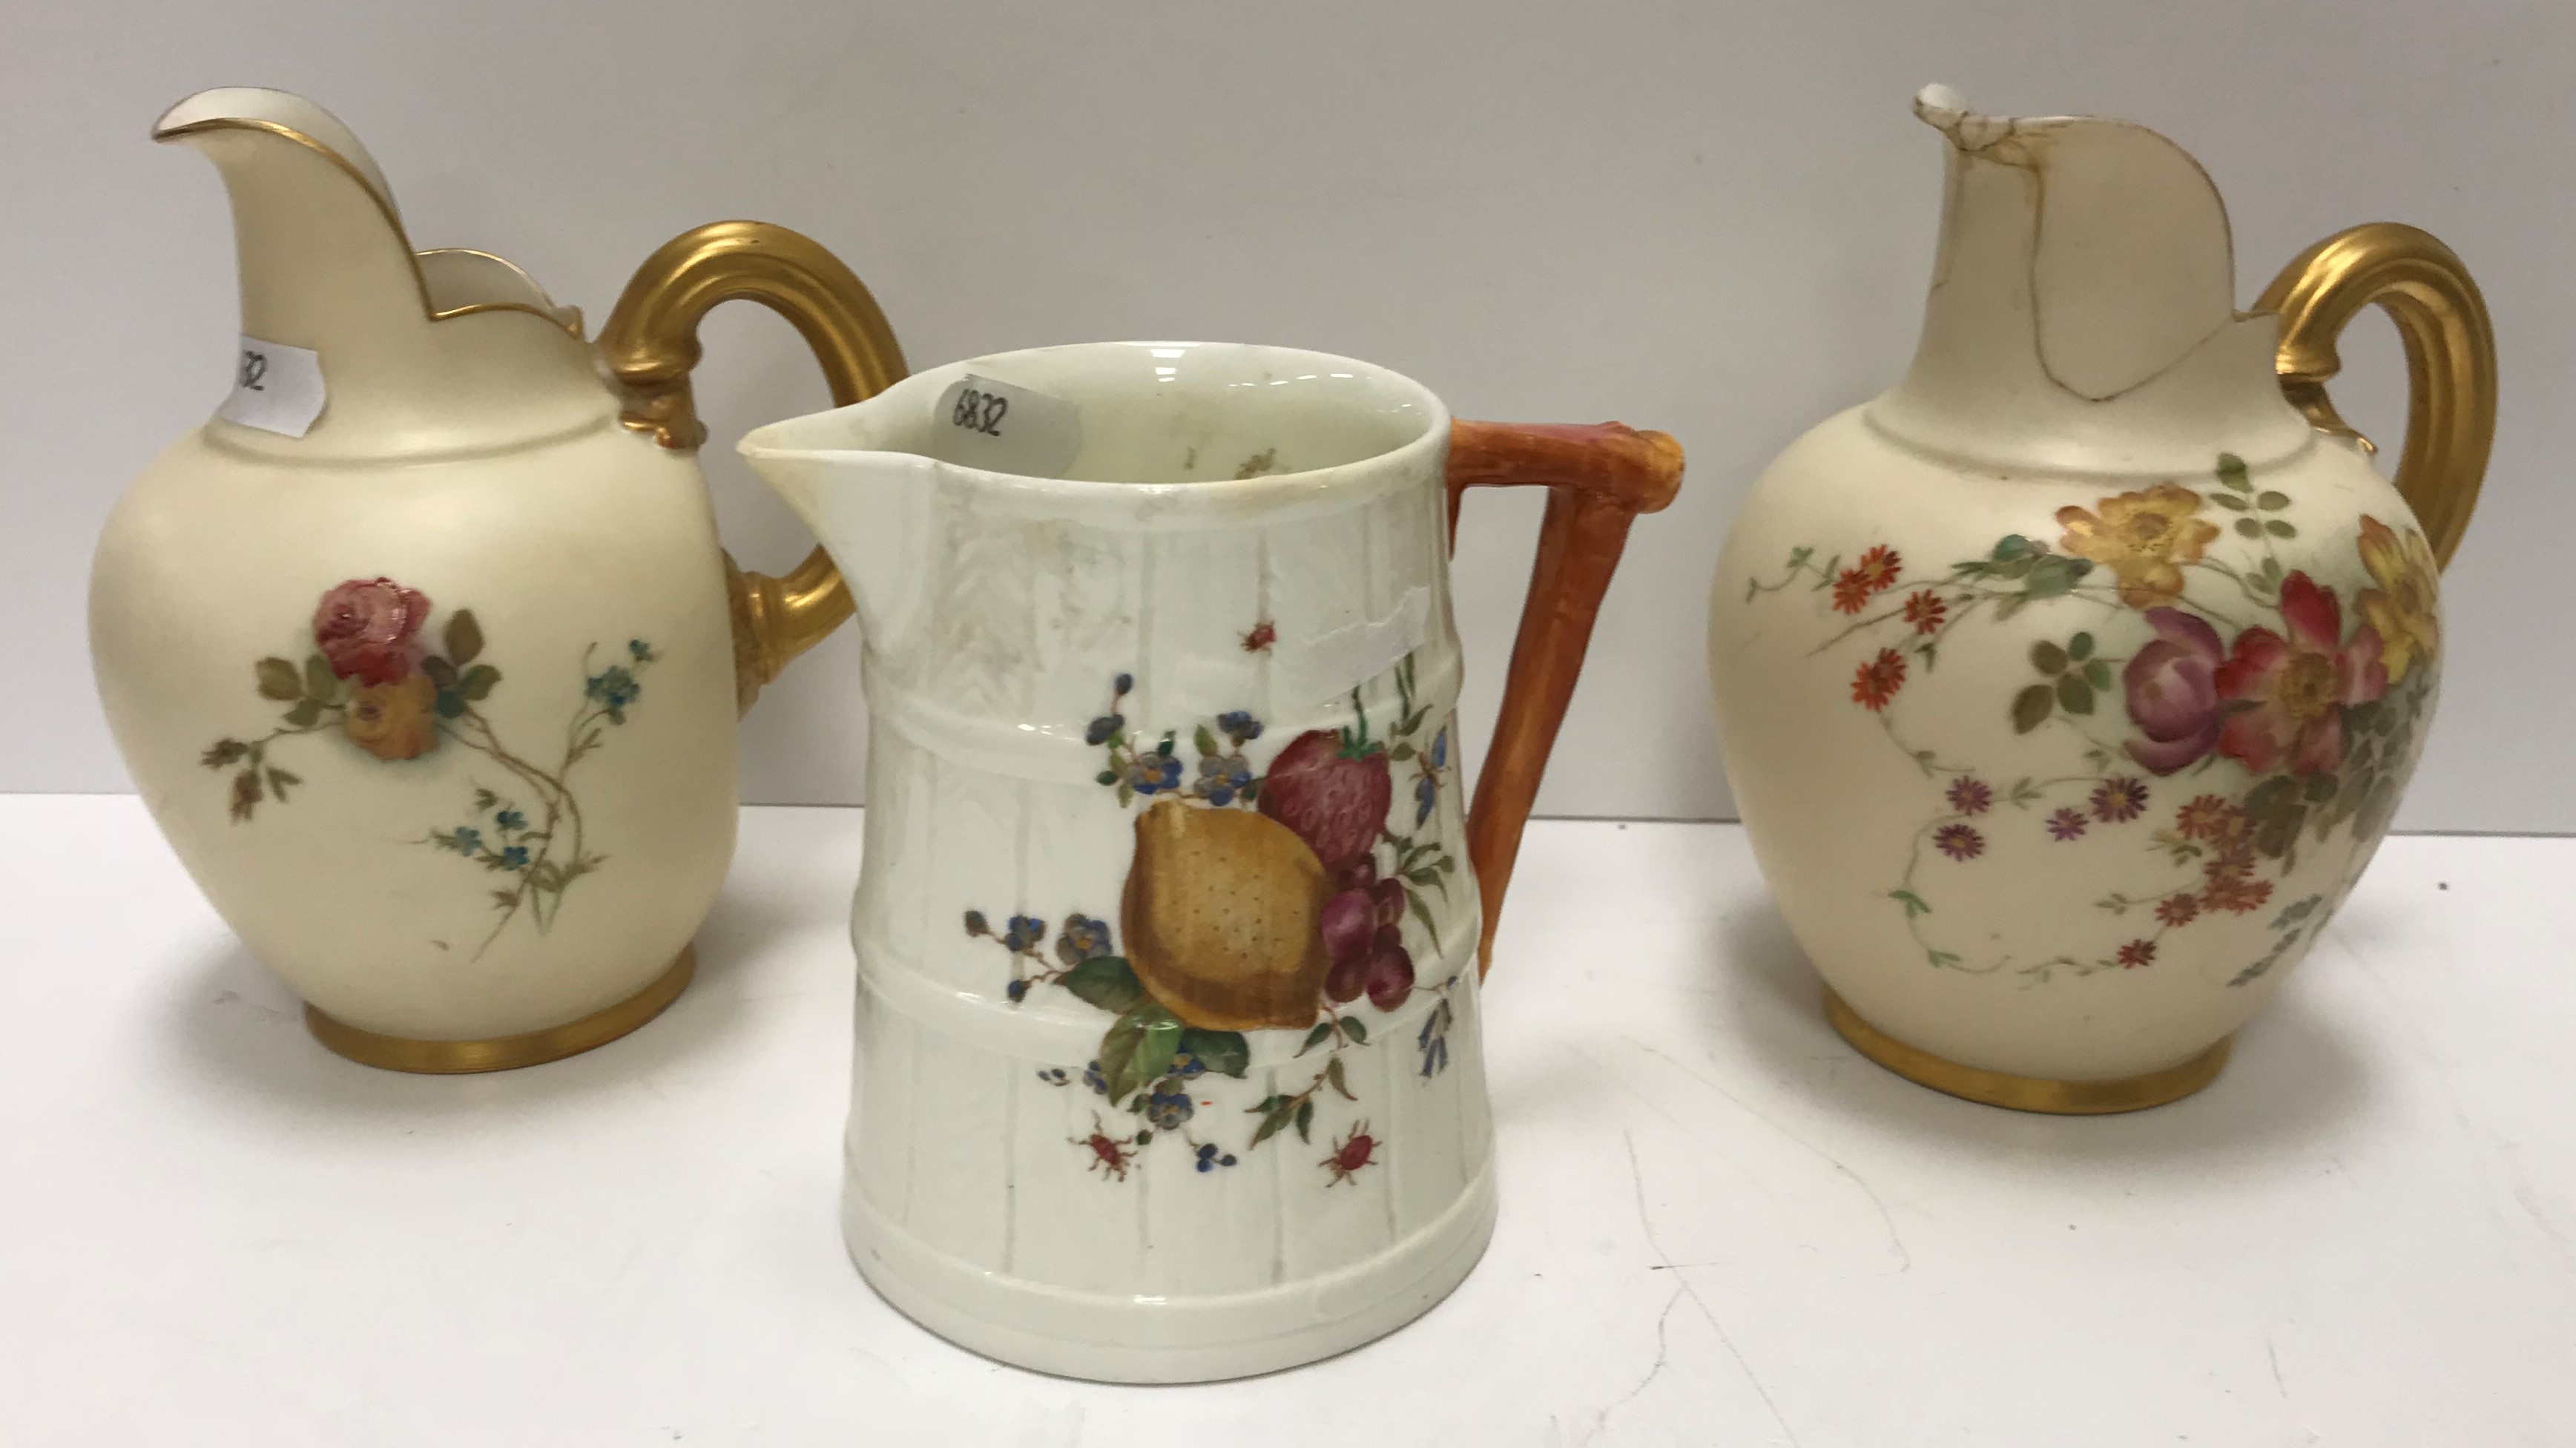 A Royal Worcester etruscan style cream jug with floral spray decoration and gilt handle date marked